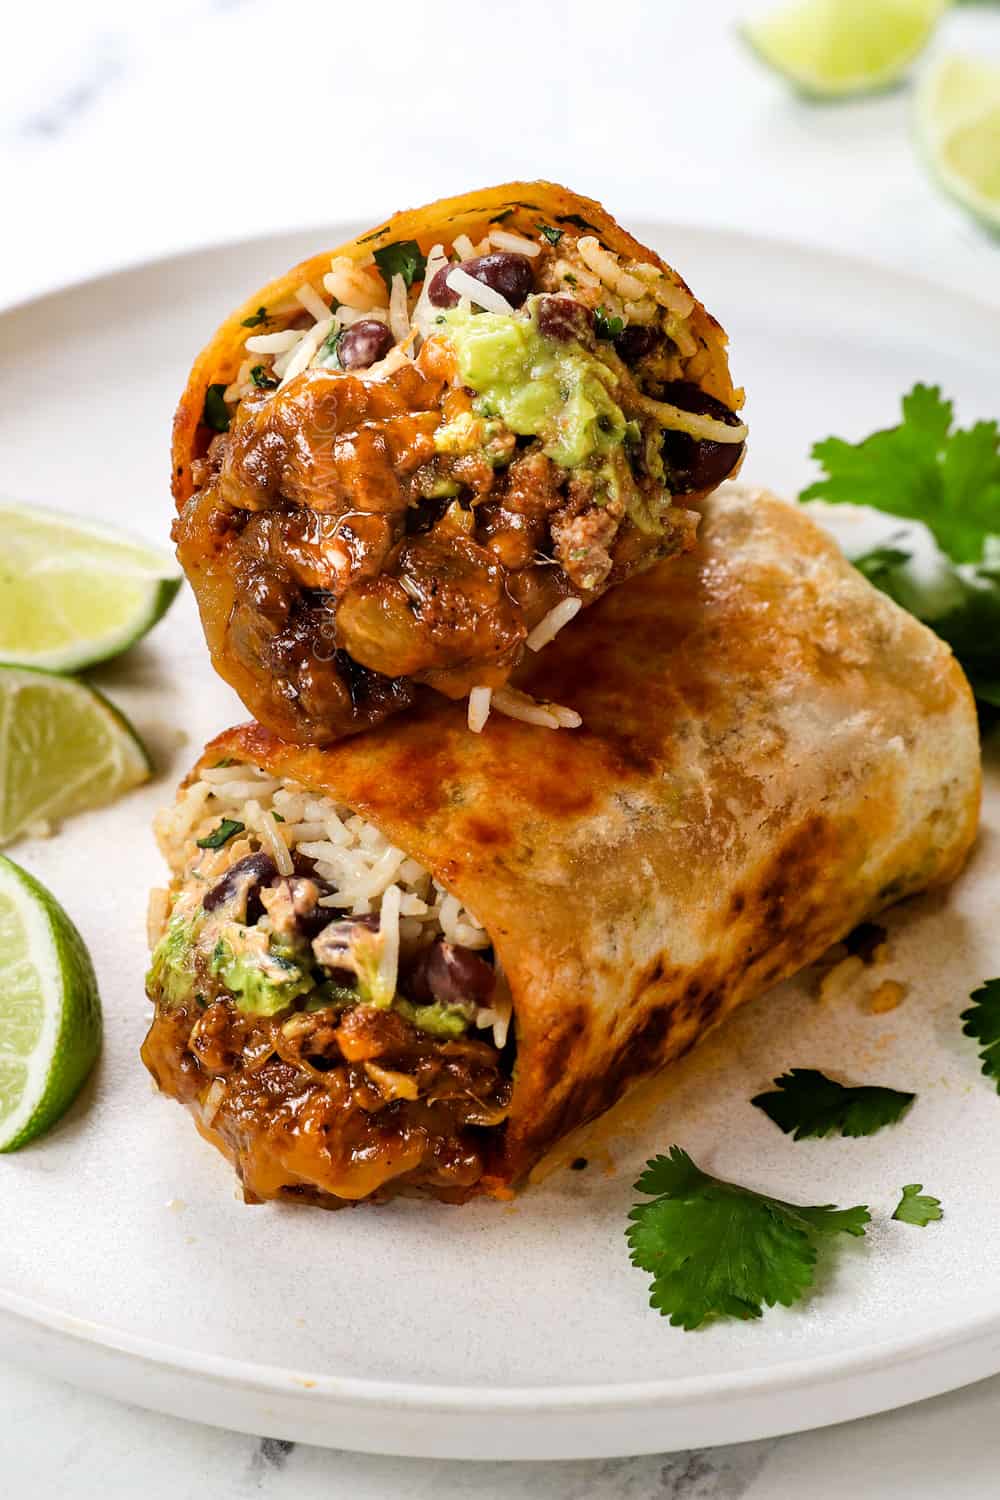 beef burrito recipe cut in half showing the filling with ground beef, rice, beans, sour cream and guacamole